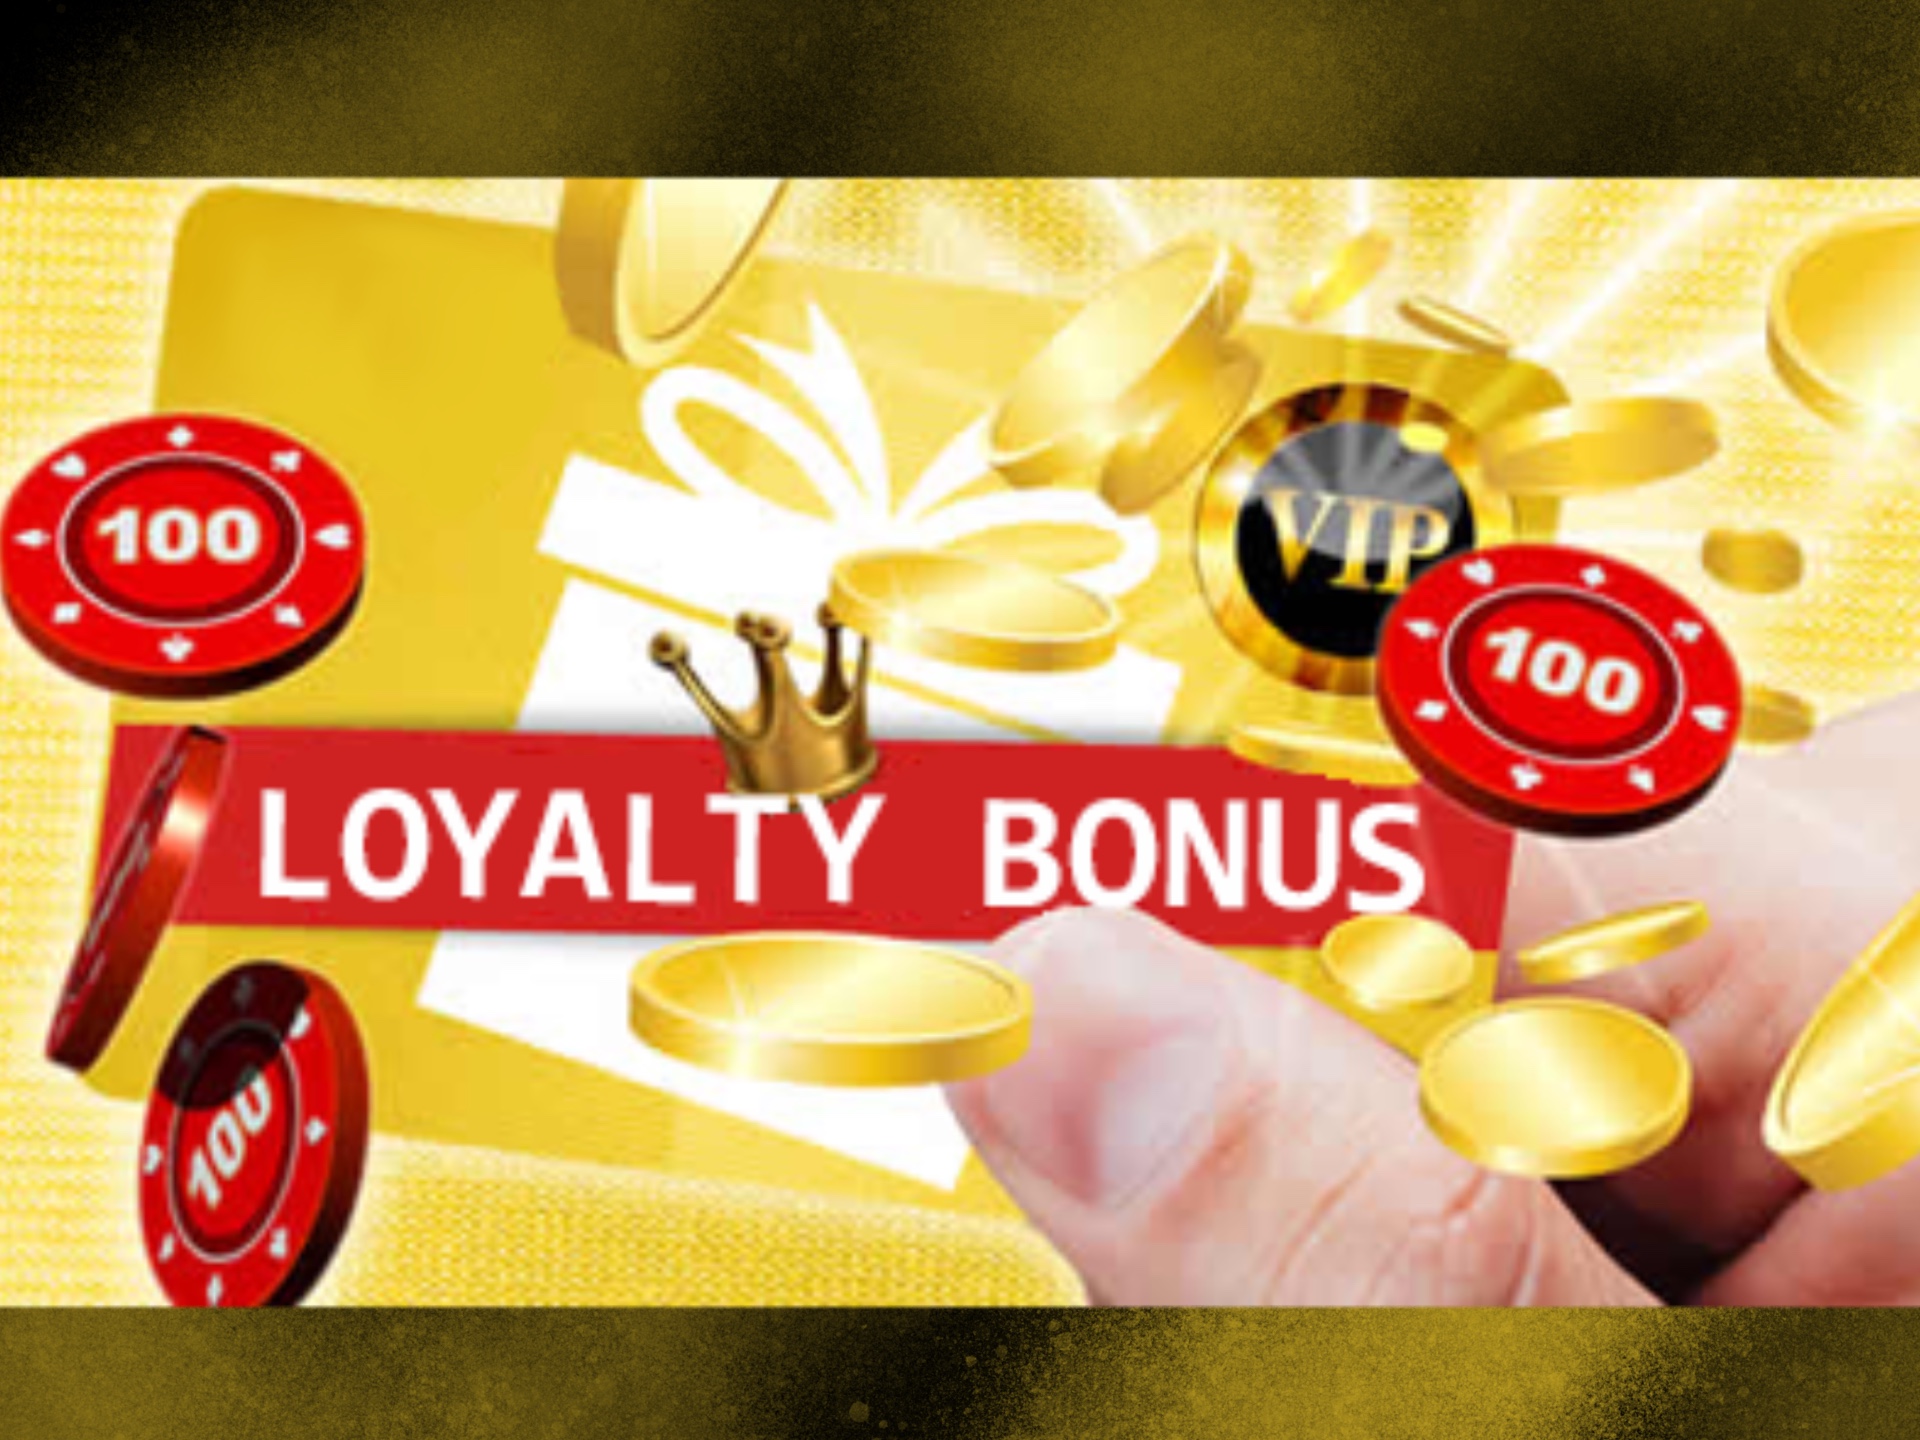 Many online casinos have their ployalty programs to hold regular players.